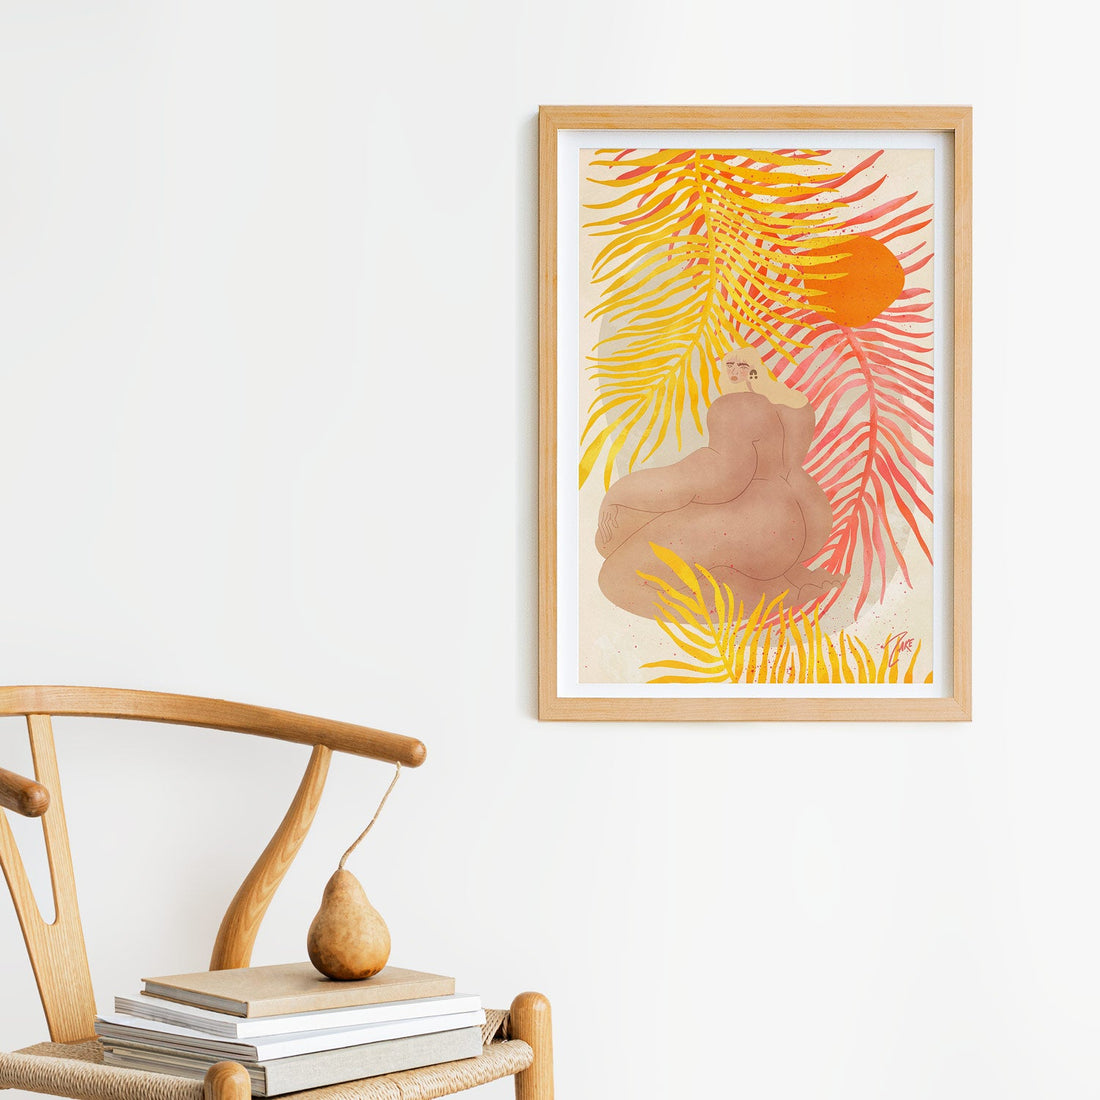 Nude art poster with tropical elements